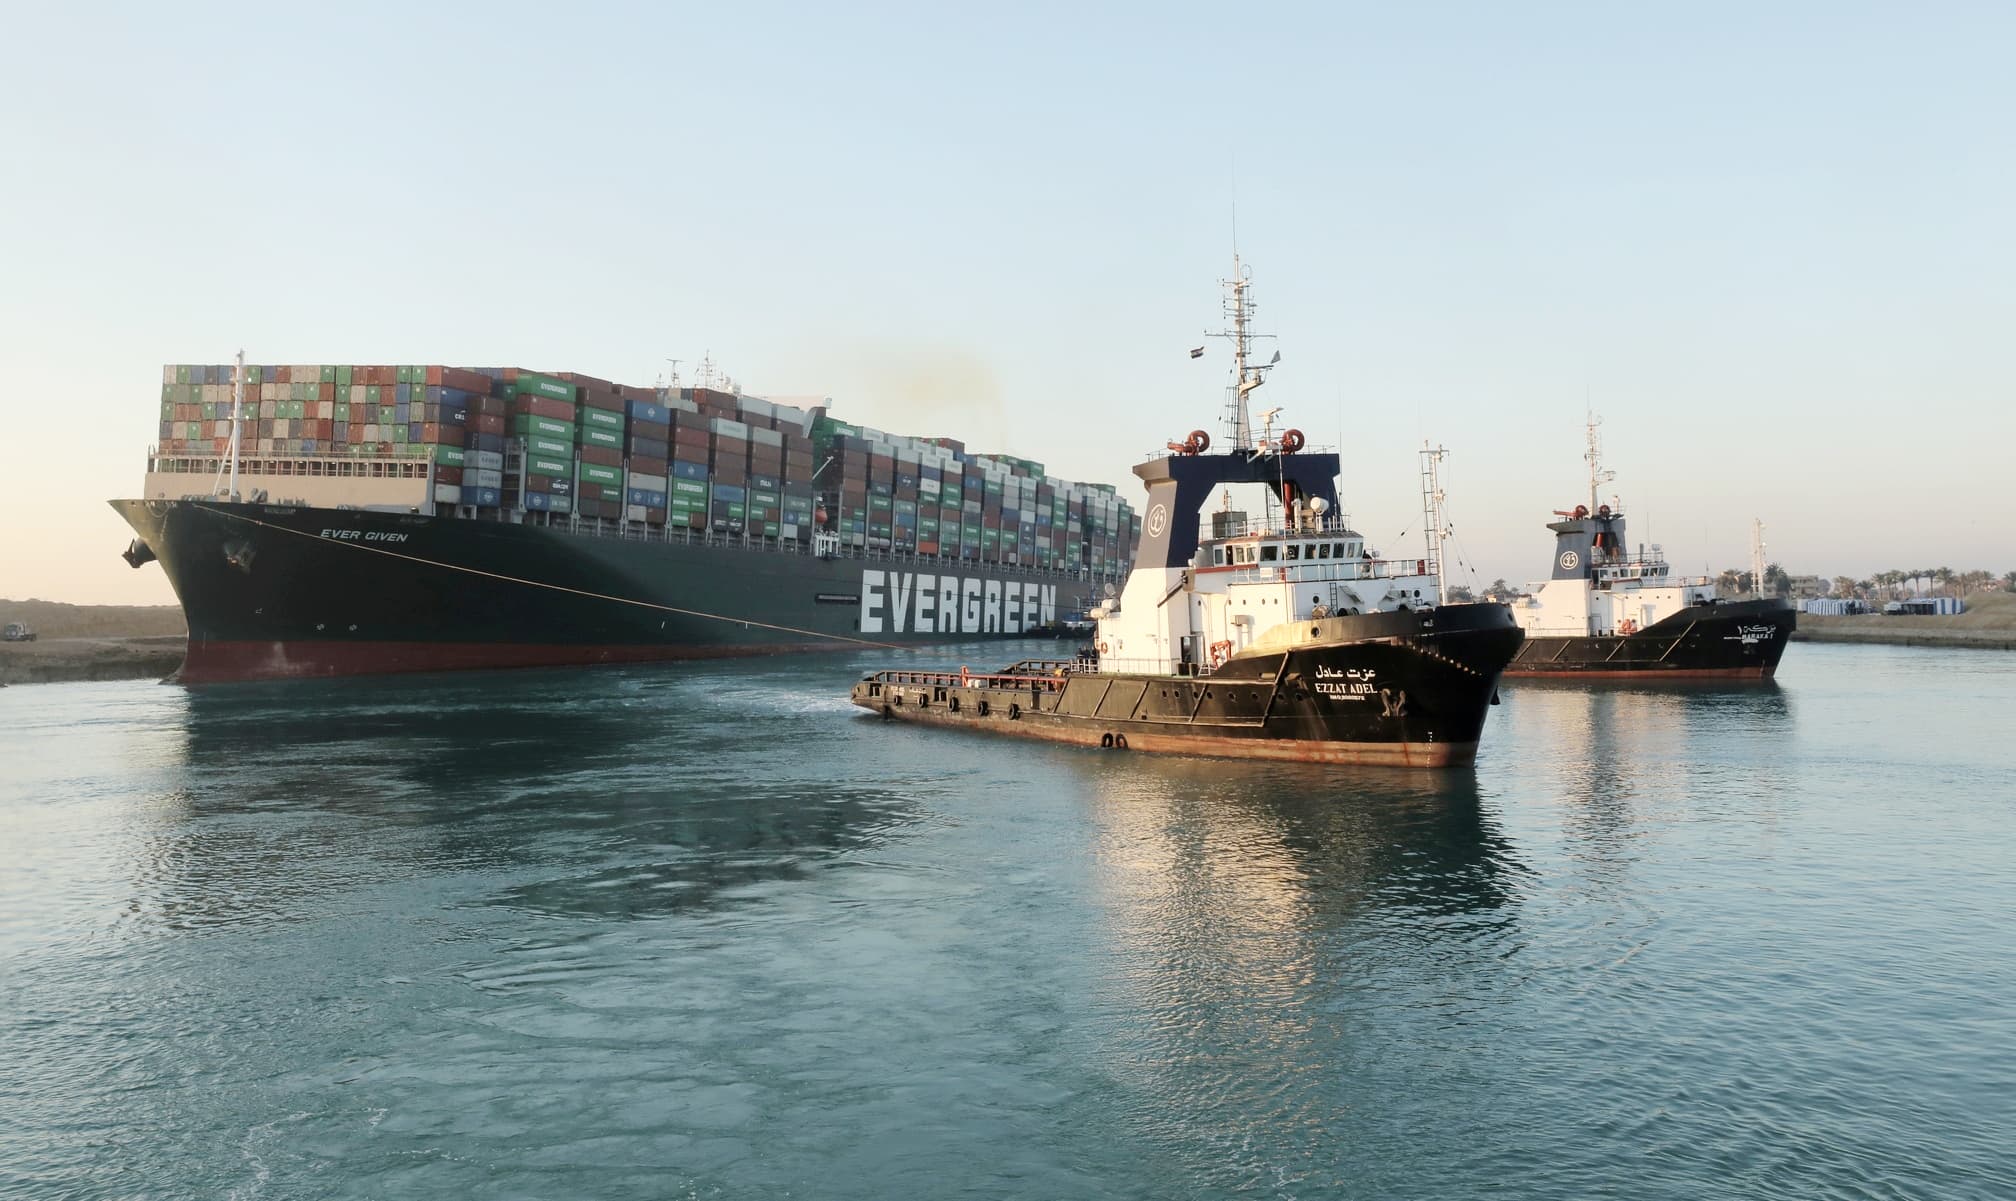 Suez Canal is moving, but the supply chain impact could last months